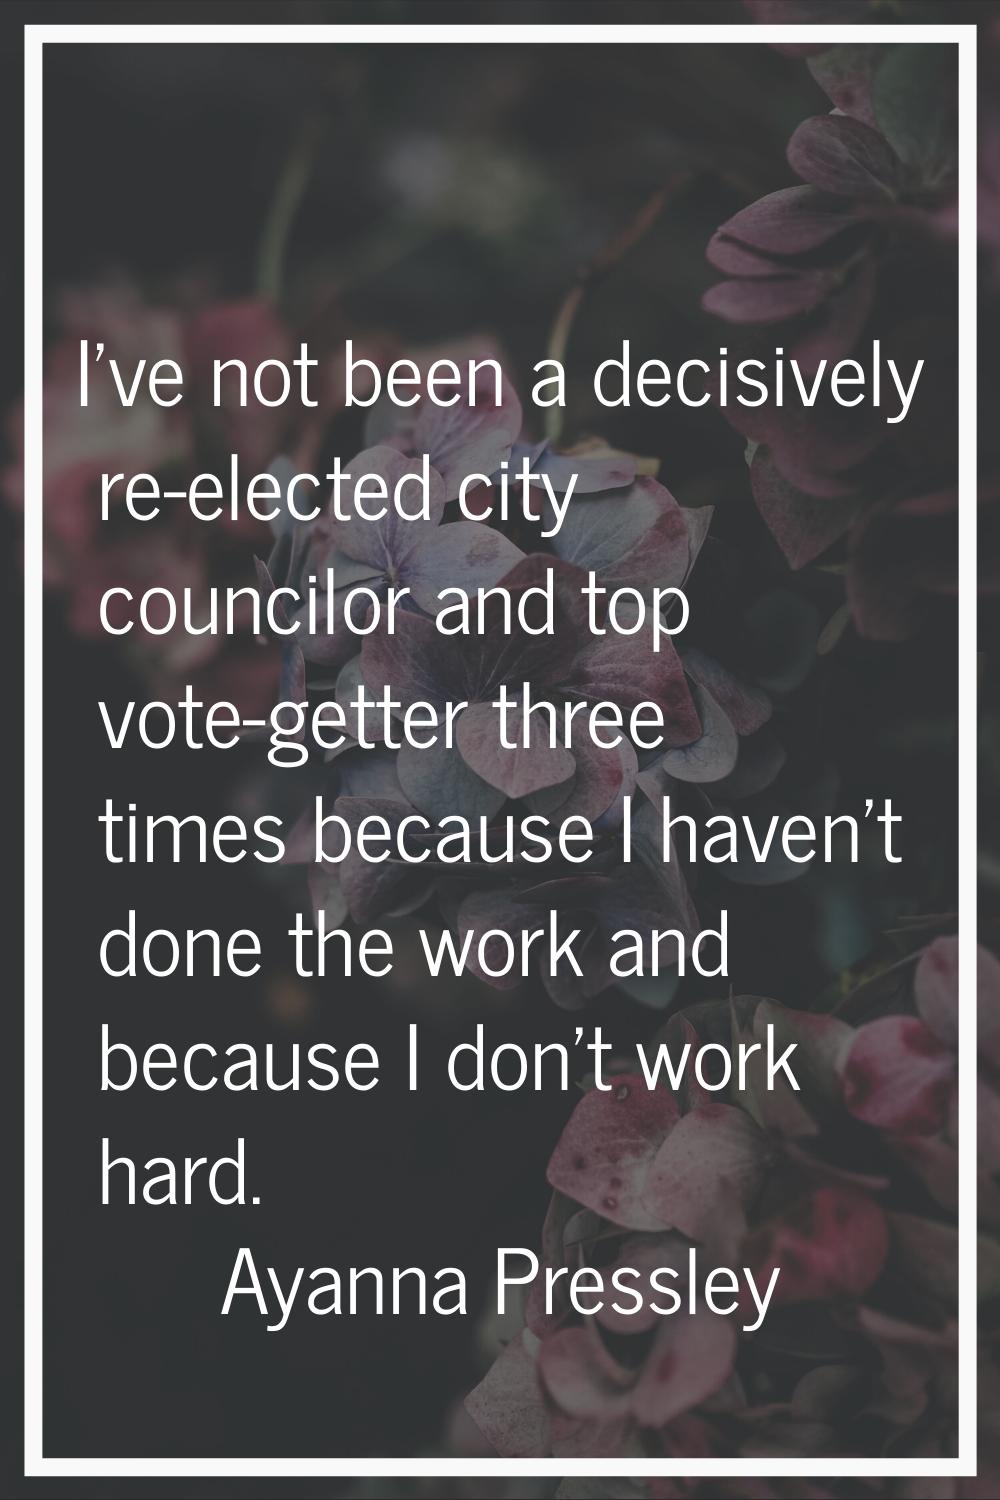 I've not been a decisively re-elected city councilor and top vote-getter three times because I have